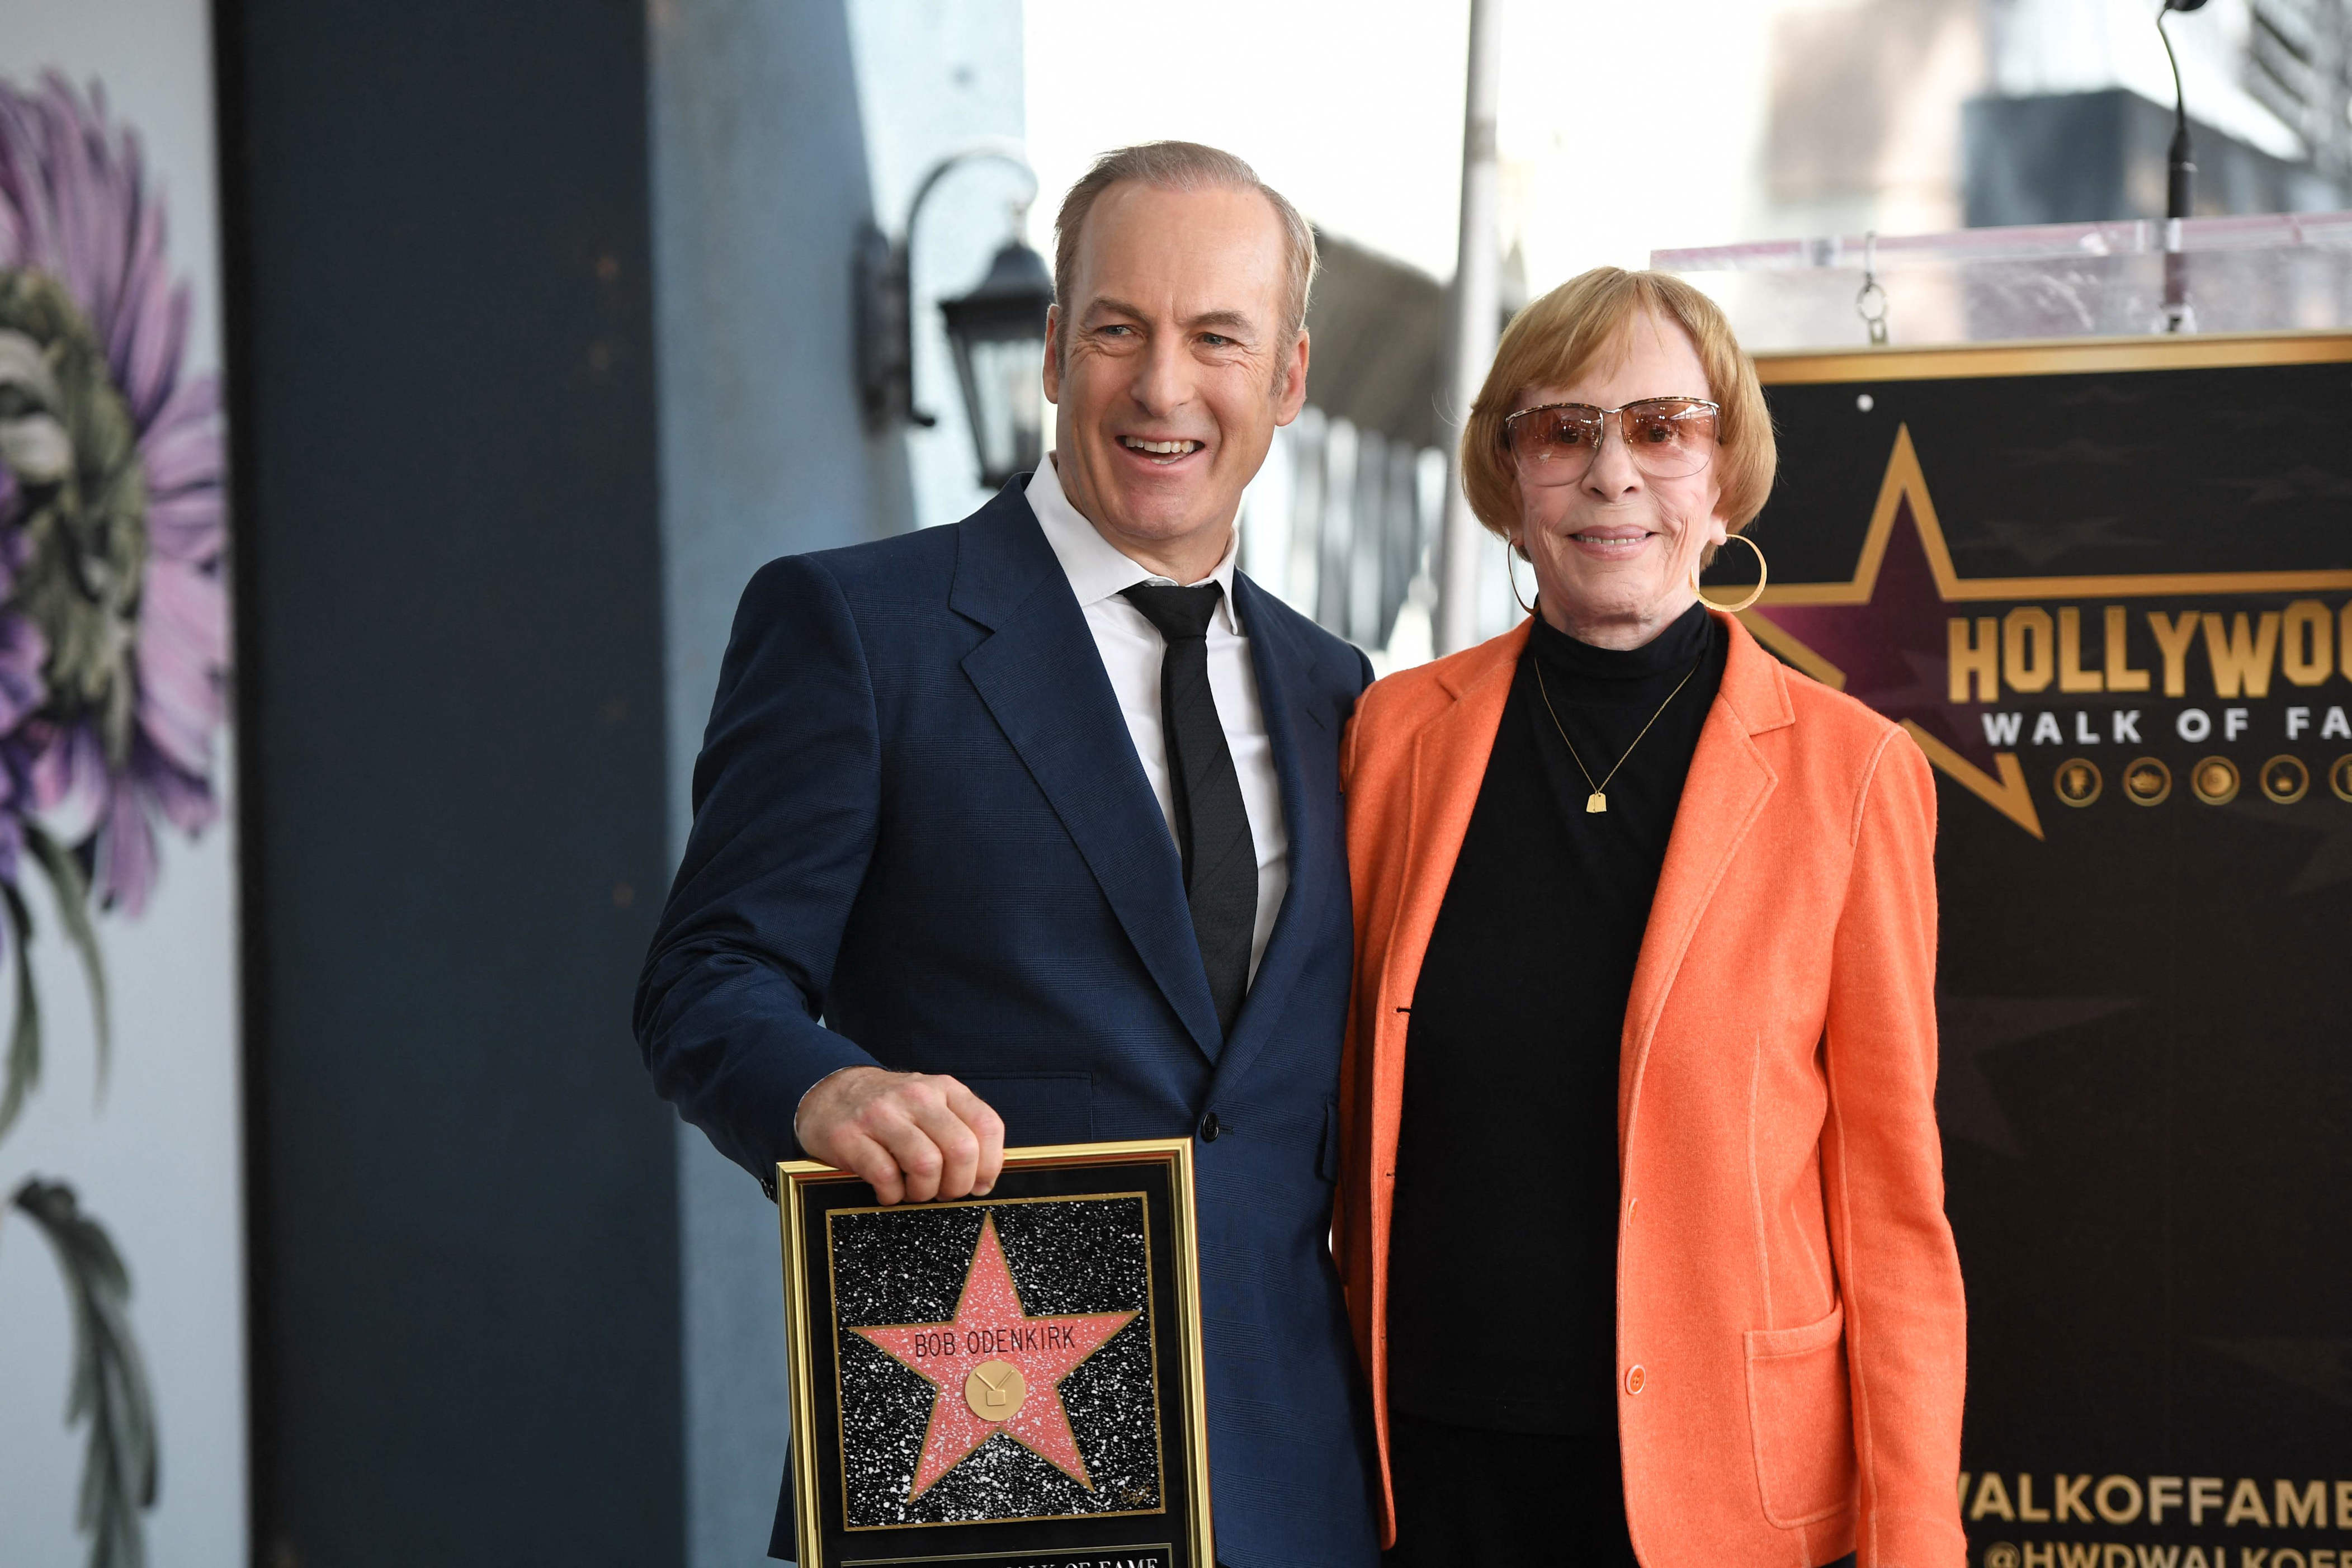 Legendary actress and comedian Carol Burnett was also there to be by Odenkirk's side as he was presented with his Hollywood star.